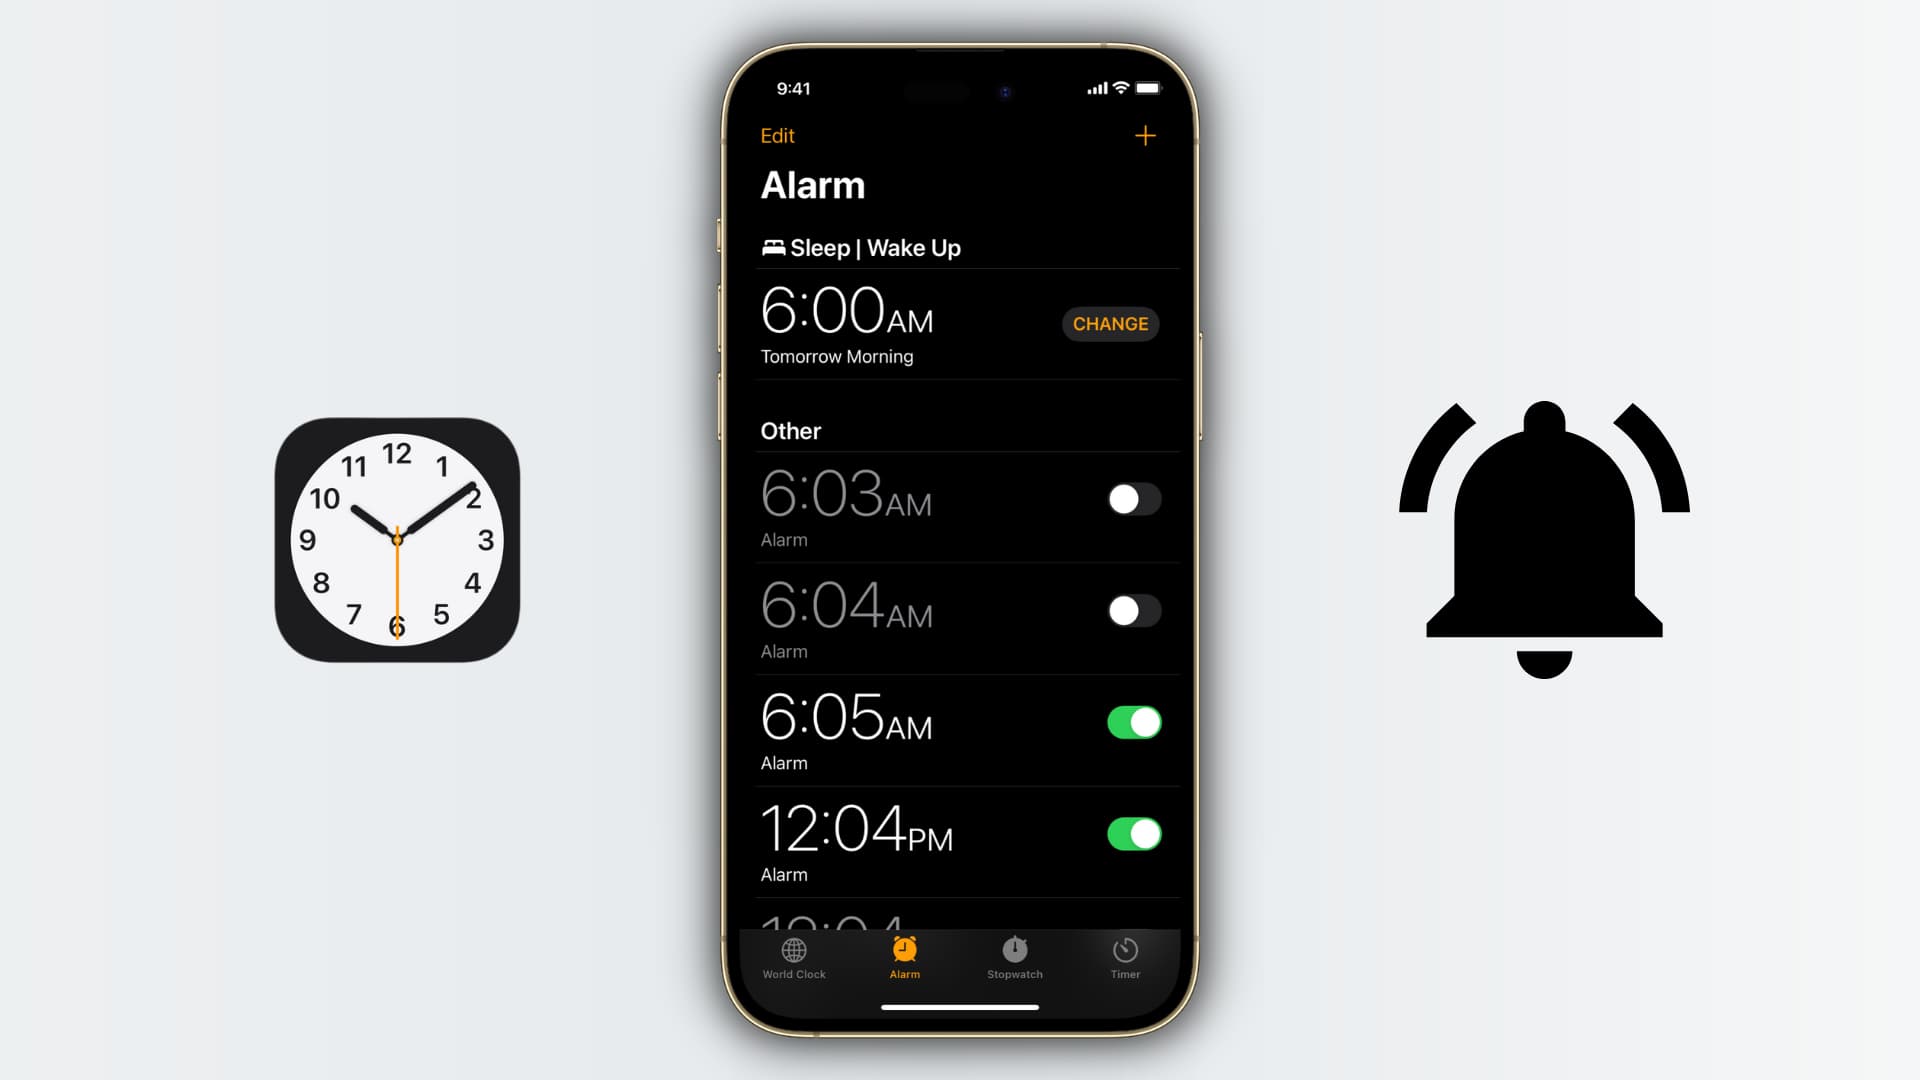 iPhone Clock app showing several alarms